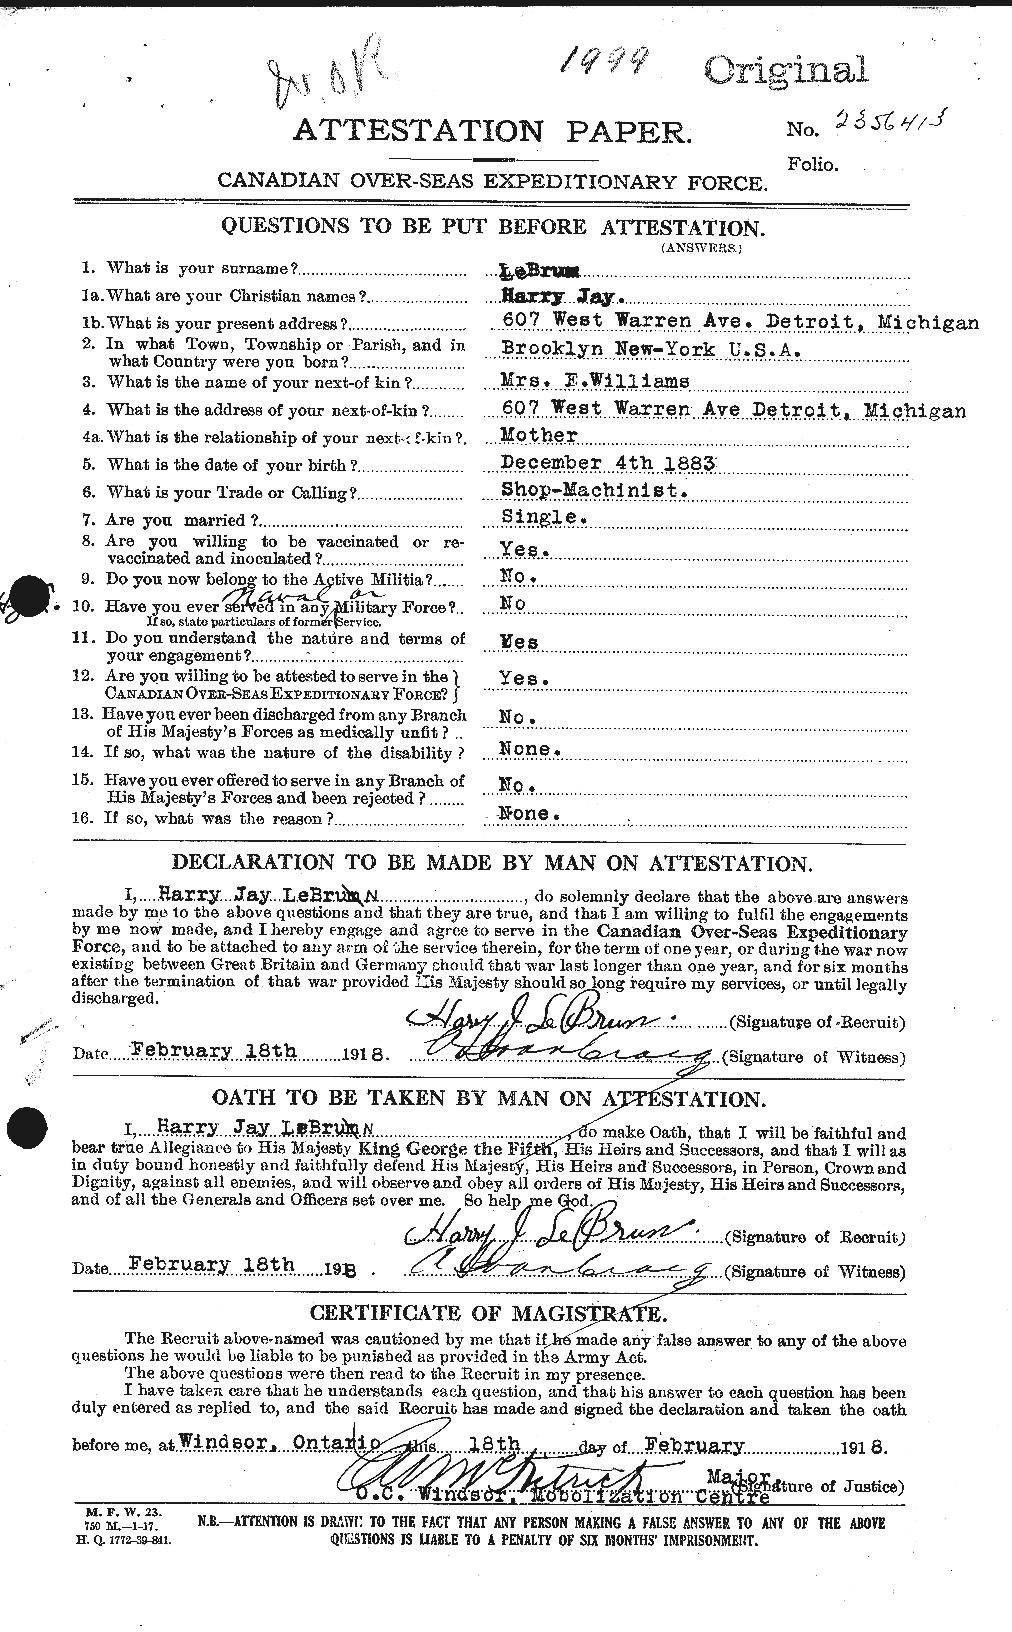 Personnel Records of the First World War - CEF 461566a